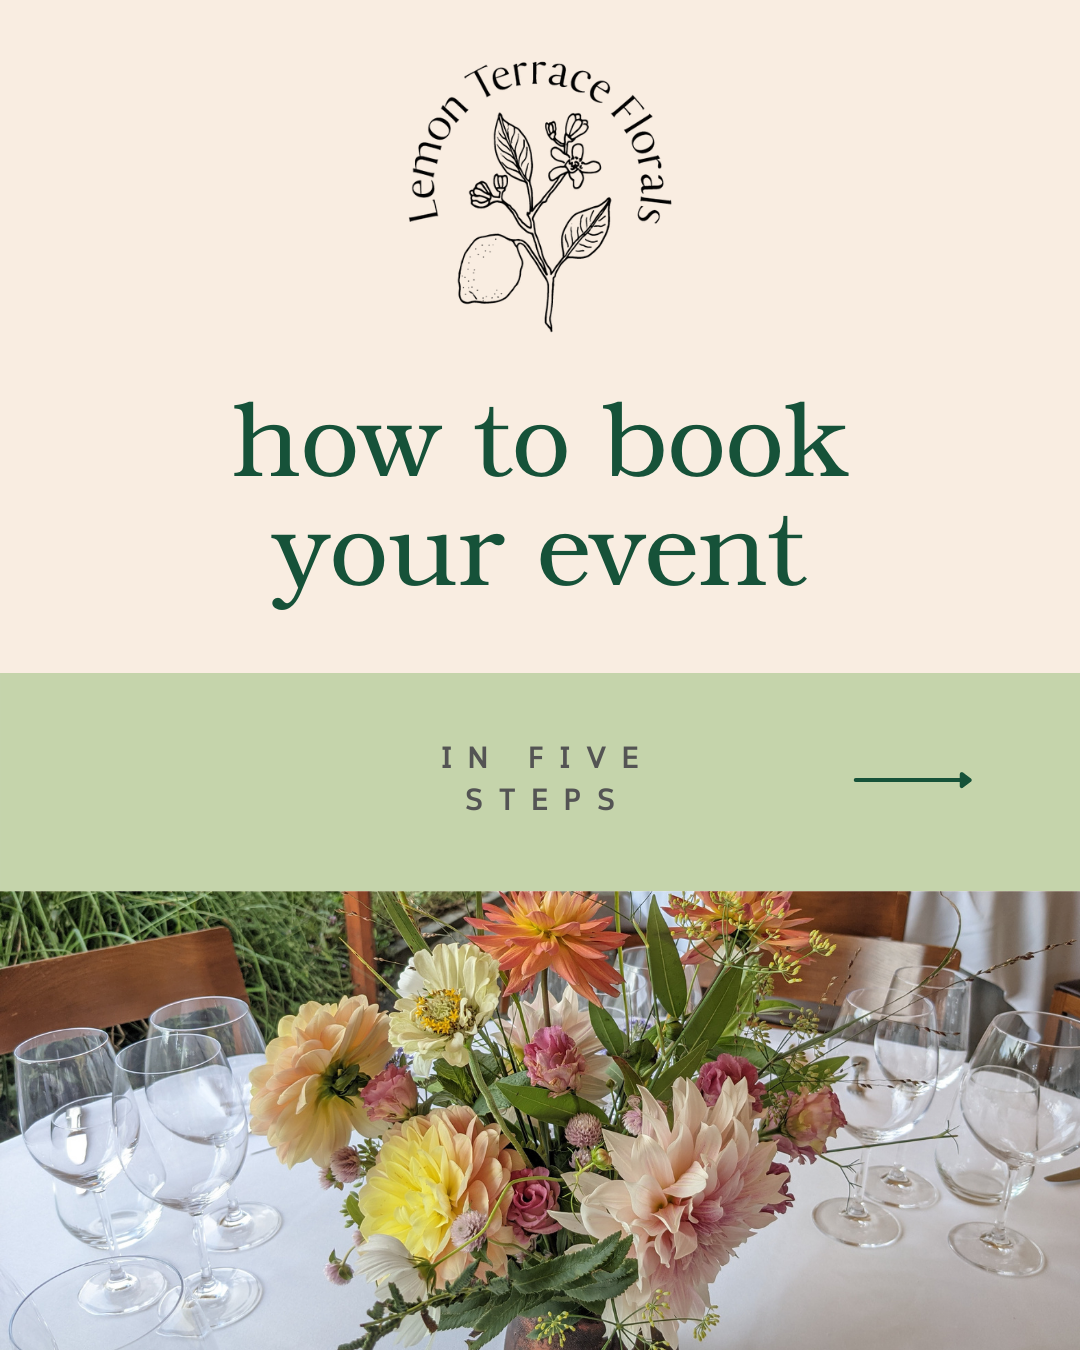 How Exactly Does Booking an Event Work?